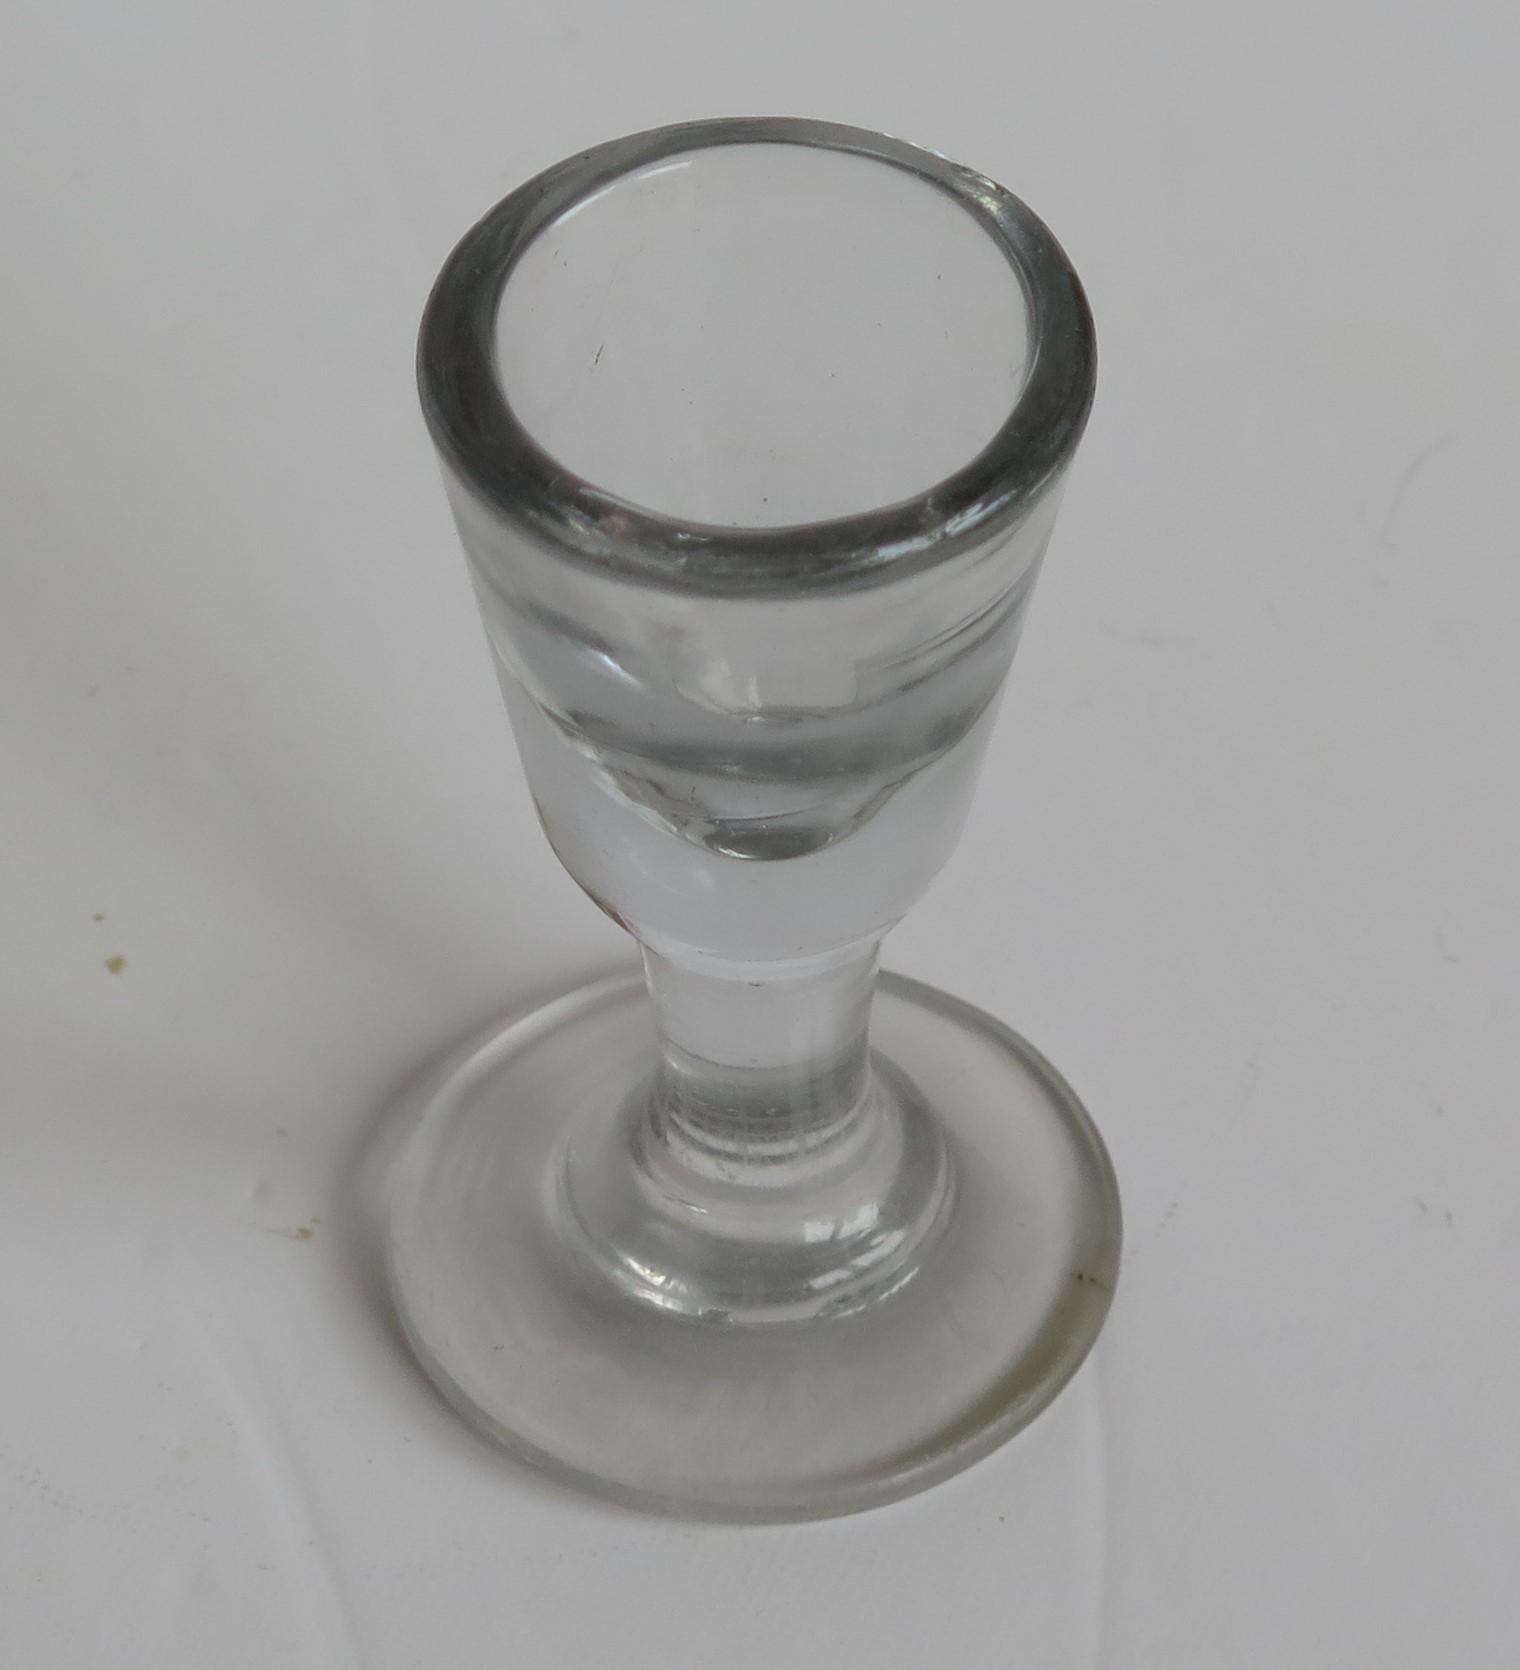 This is a very good English hand blown, Georgian drinking dram glass, which we date to the turn of the 18th Century, Circa 1800. 

This glass is individually hand blown, from lead glass which is characterised by its soft grey colour, its fairly